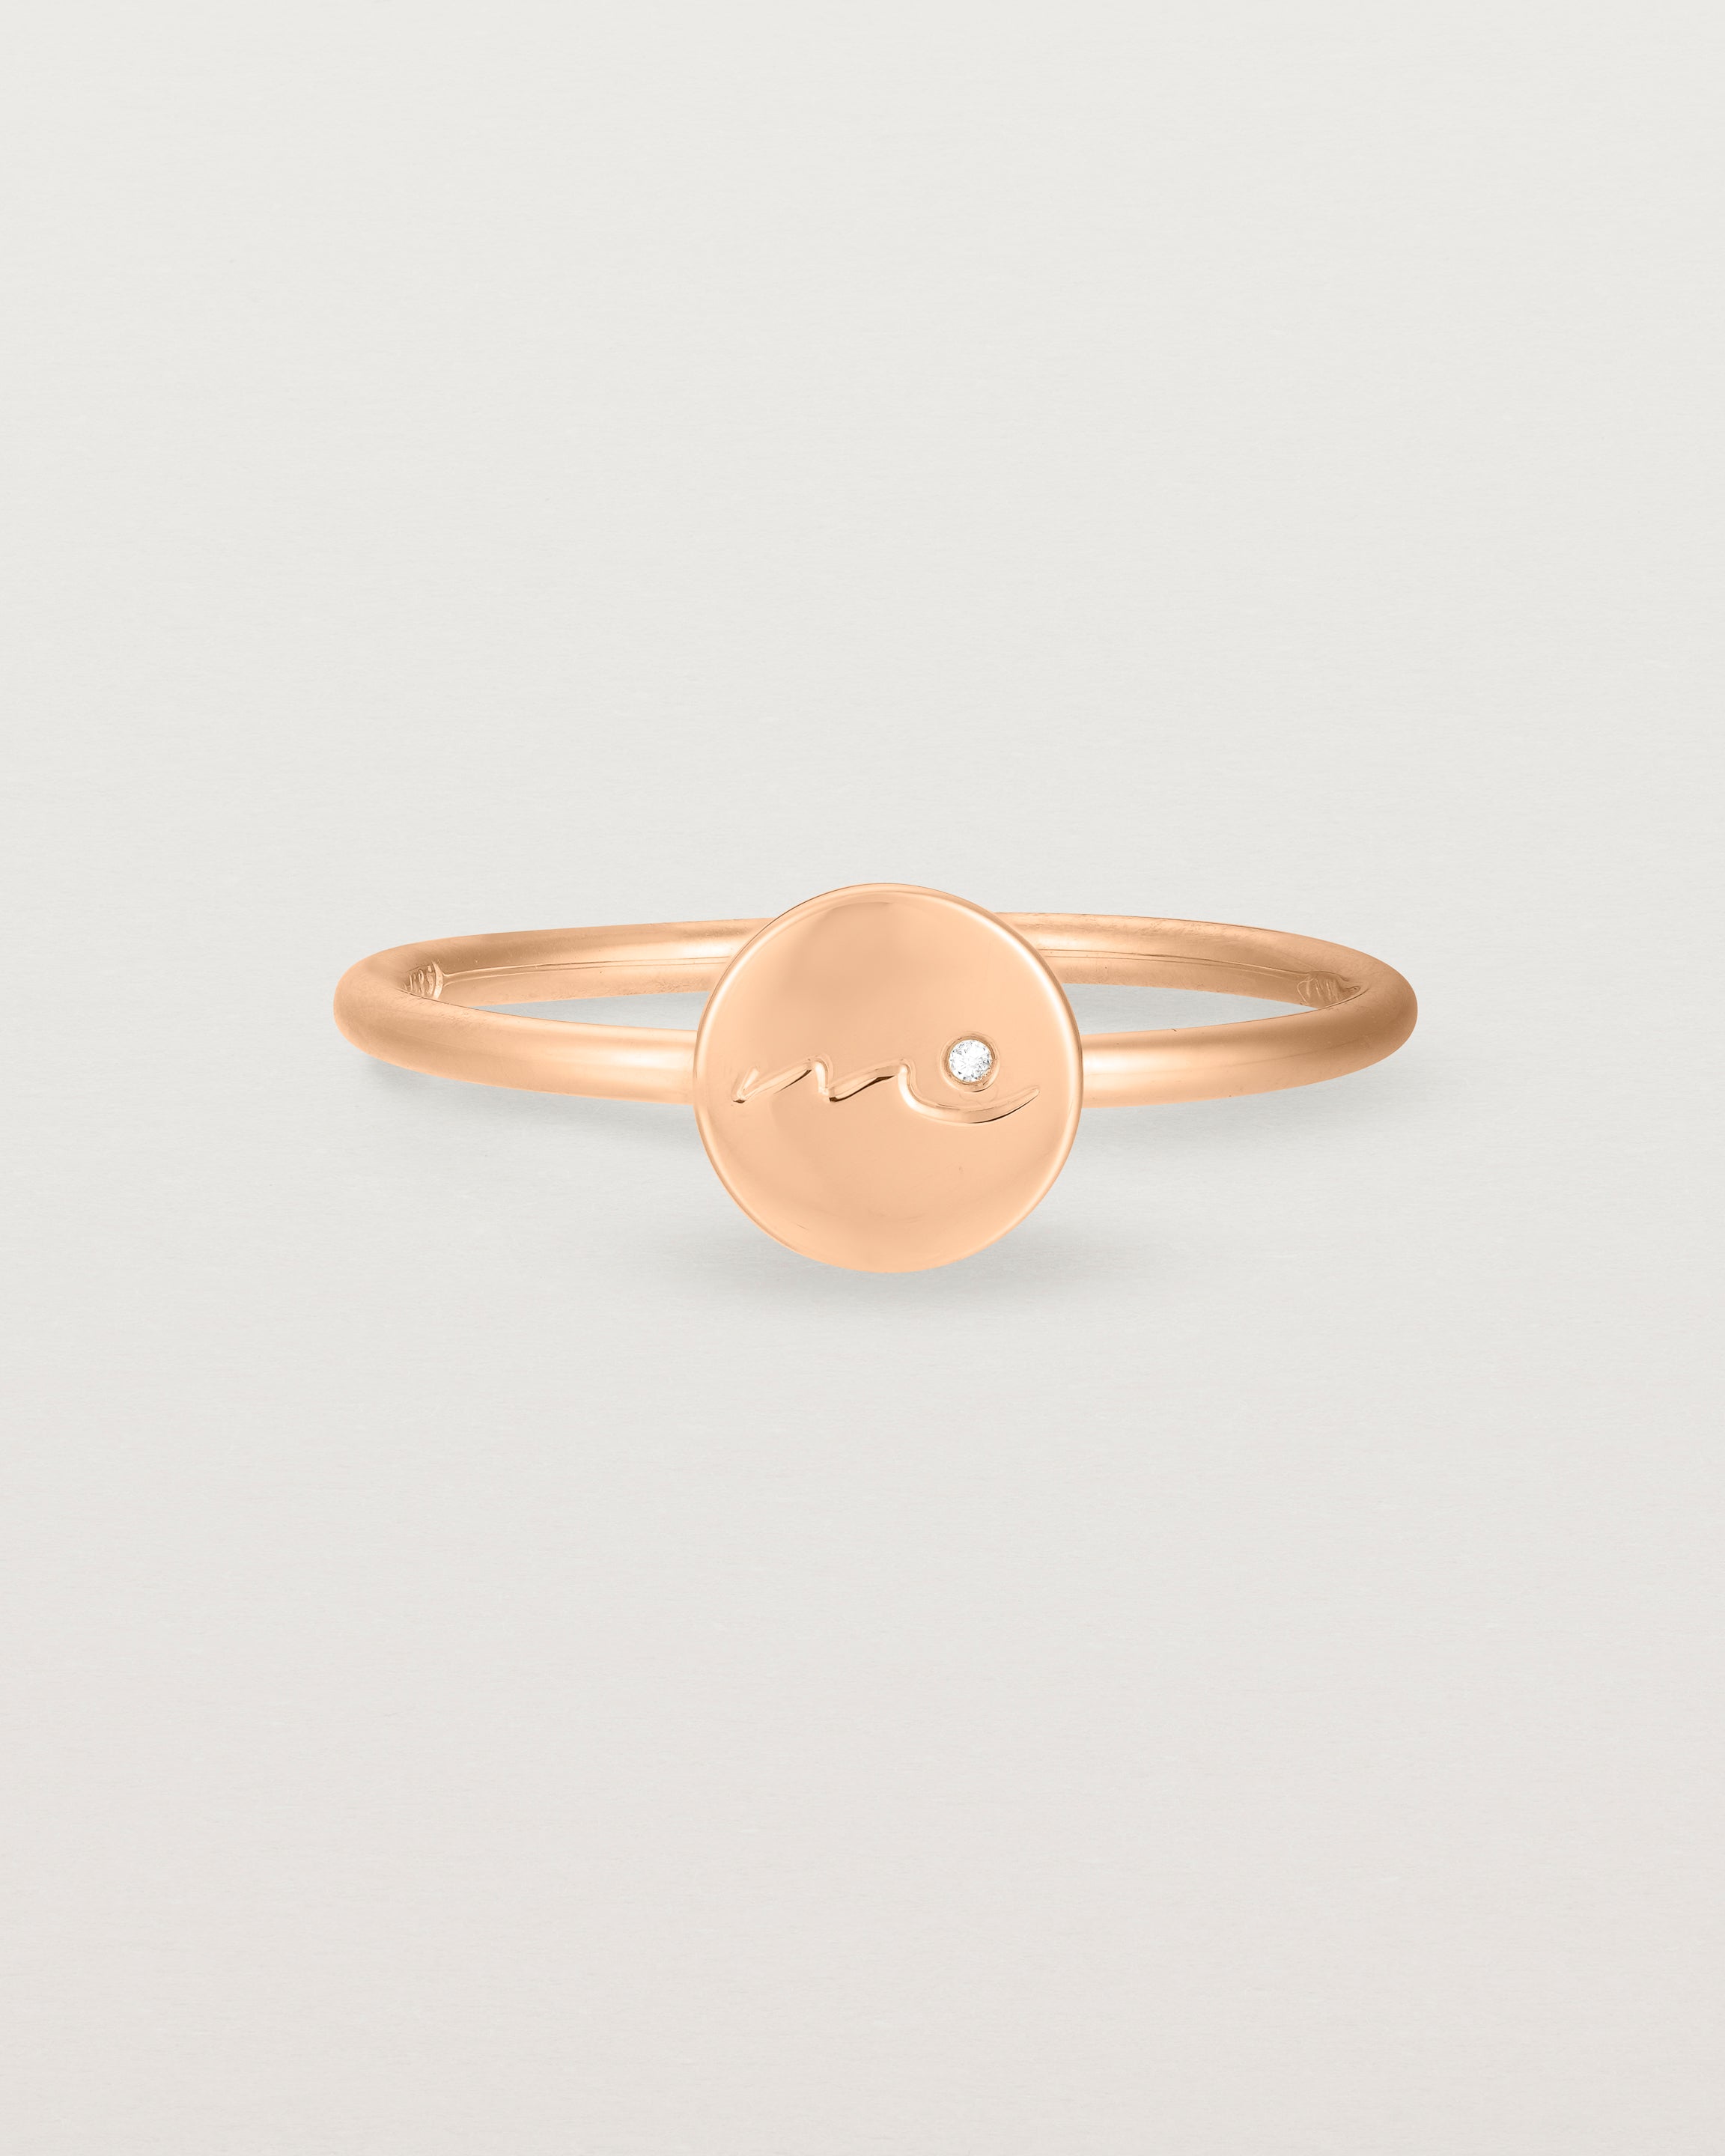 Front view of a rose gold ring featuring a disc with the letter m engraved and a small diamond set